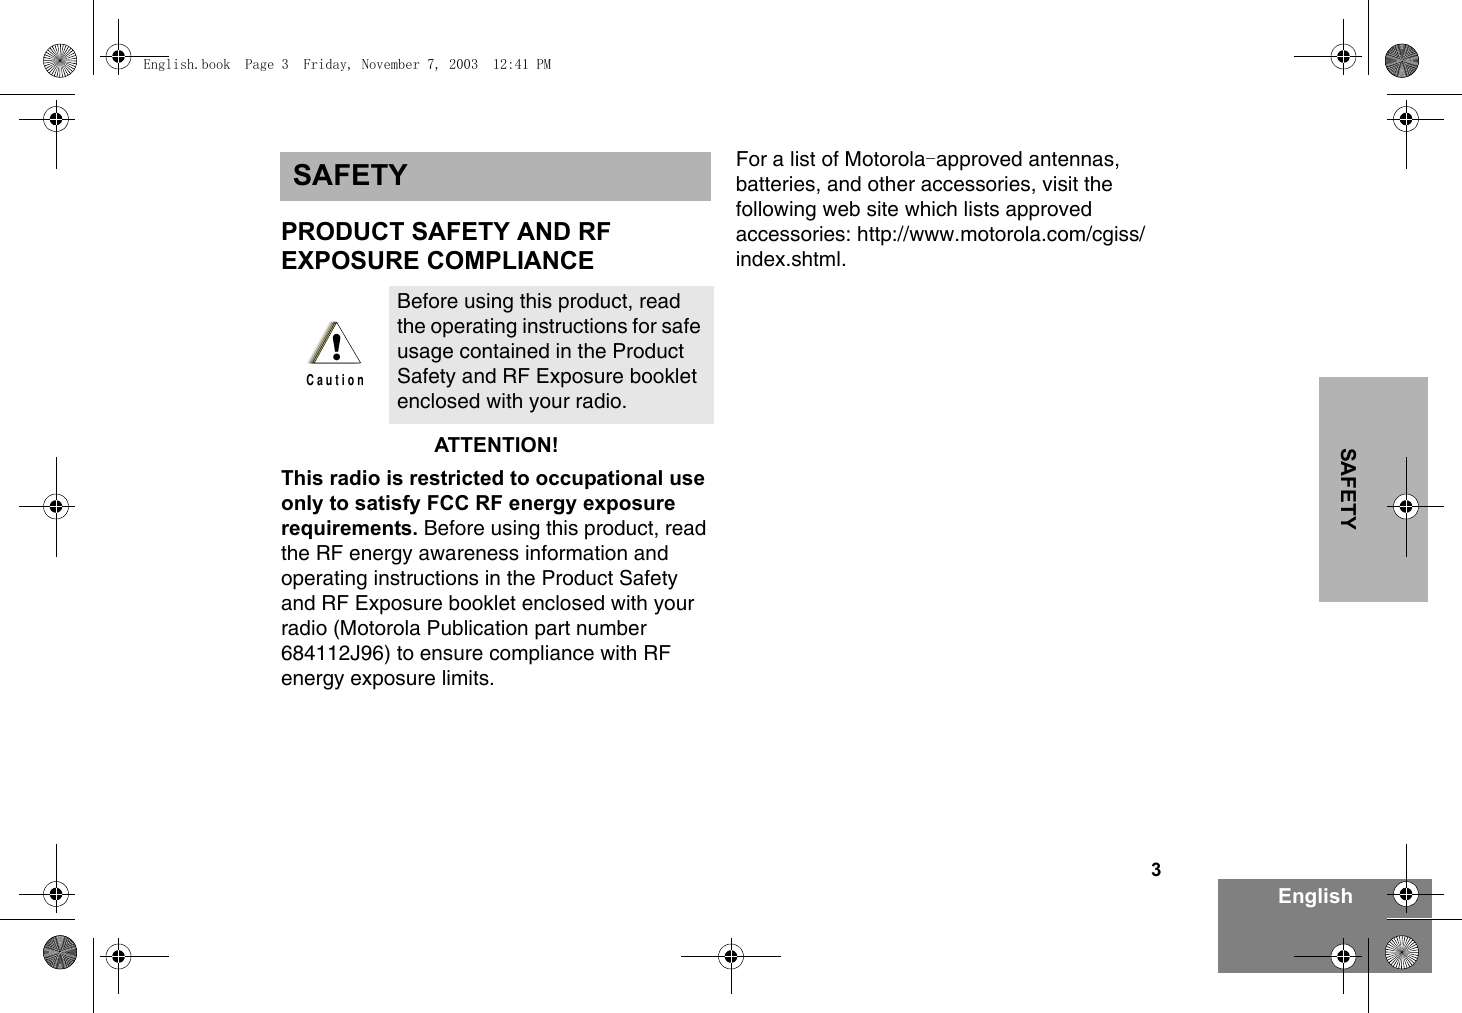 3EnglishSAFETYSAFETYPRODUCT SAFETY AND RFEXPOSURE COMPLIANCEATTENTION!This radio is restricted to occupational use only to satisfy FCC RF energy exposure requirements. Before using this product, read the RF energy awareness information and operating instructions in the Product Safety and RF Exposure booklet enclosed with your radio (Motorola Publication part number 684112J96) to ensure compliance with RF energy exposure limits.For a list of Motorola approved antennas, -batteries, and other accessories, visit the following web site which lists approved accessories: http://www.motorola.com/cgiss/index.shtml.Before using this product, read the operating instructions for safe usage contained in the Product Safety and RF Exposure booklet enclosed with your radio.!C a u t i o nEnglish.book  Page 3  Friday, November 7, 2003  12:41 PM